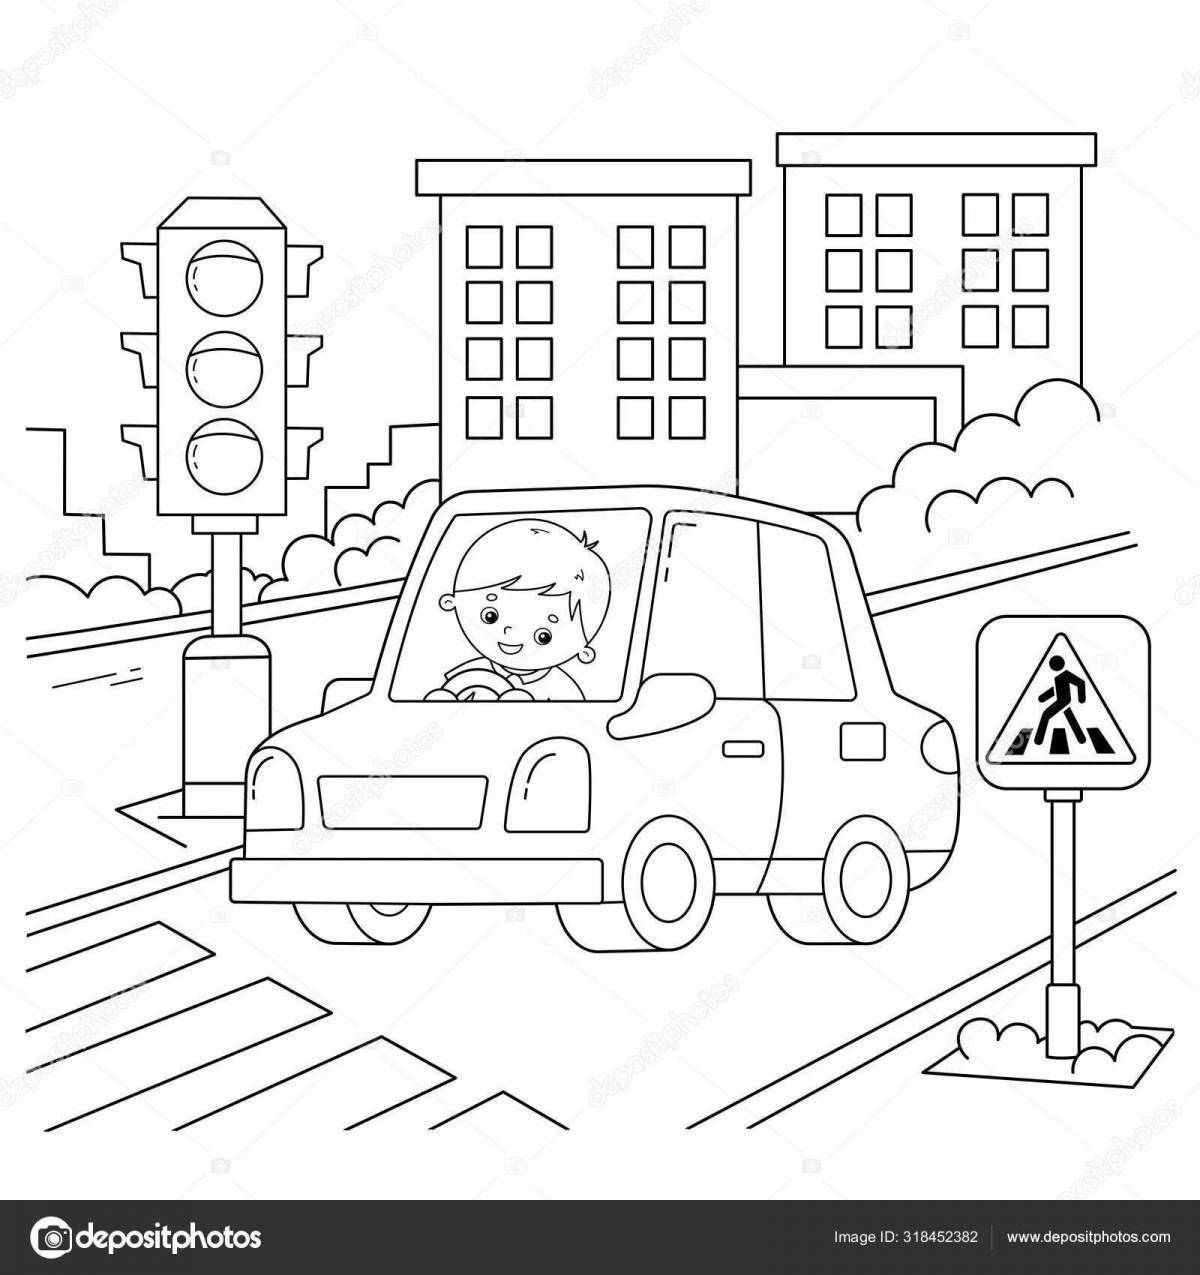 Bright traffic rules coloring for preschoolers